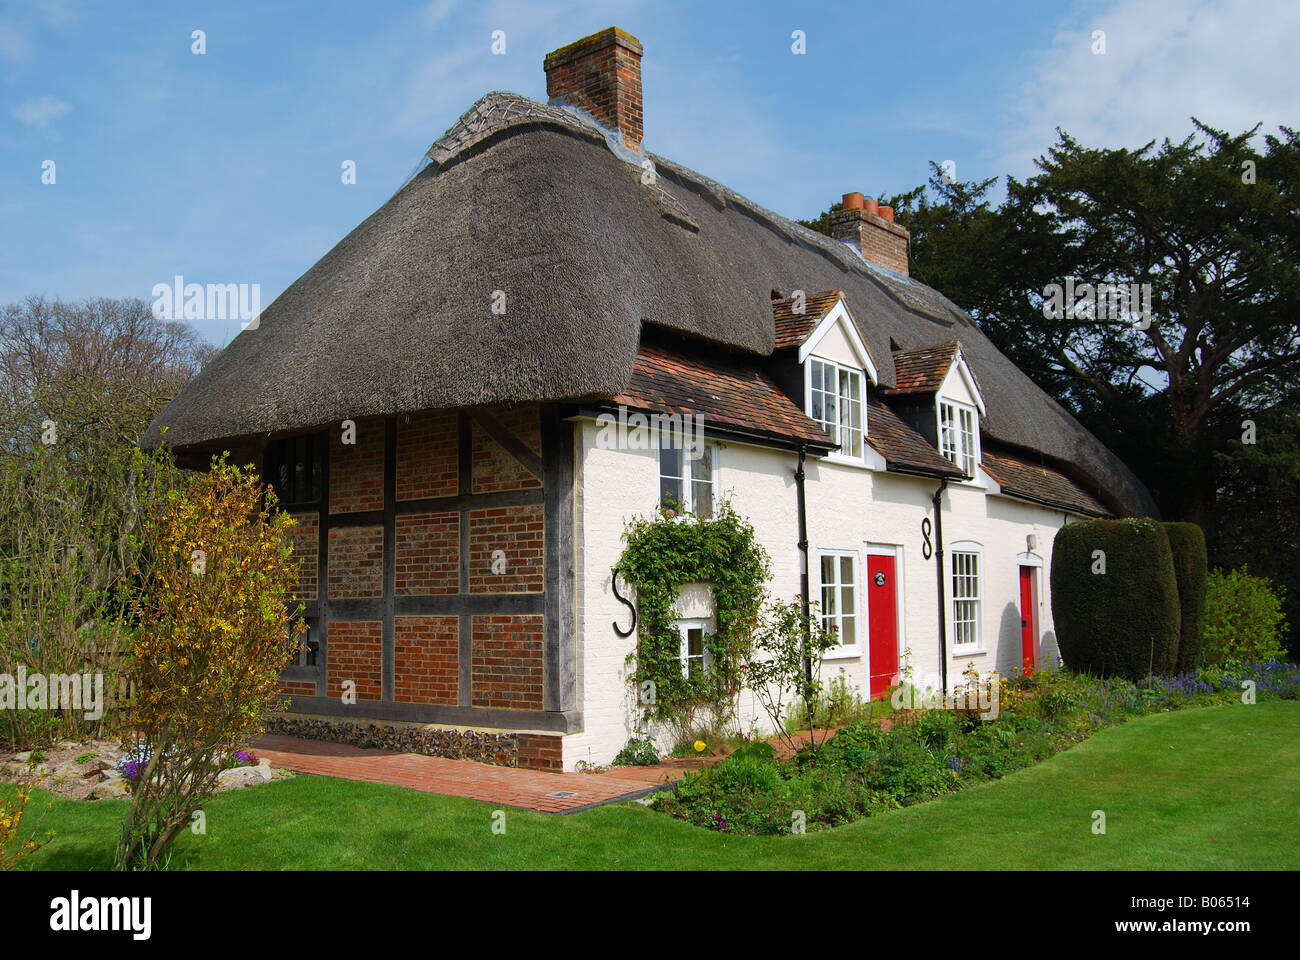 Chalet chaume, Denmead, Hampshire, Angleterre, Royaume-Uni Banque D'Images